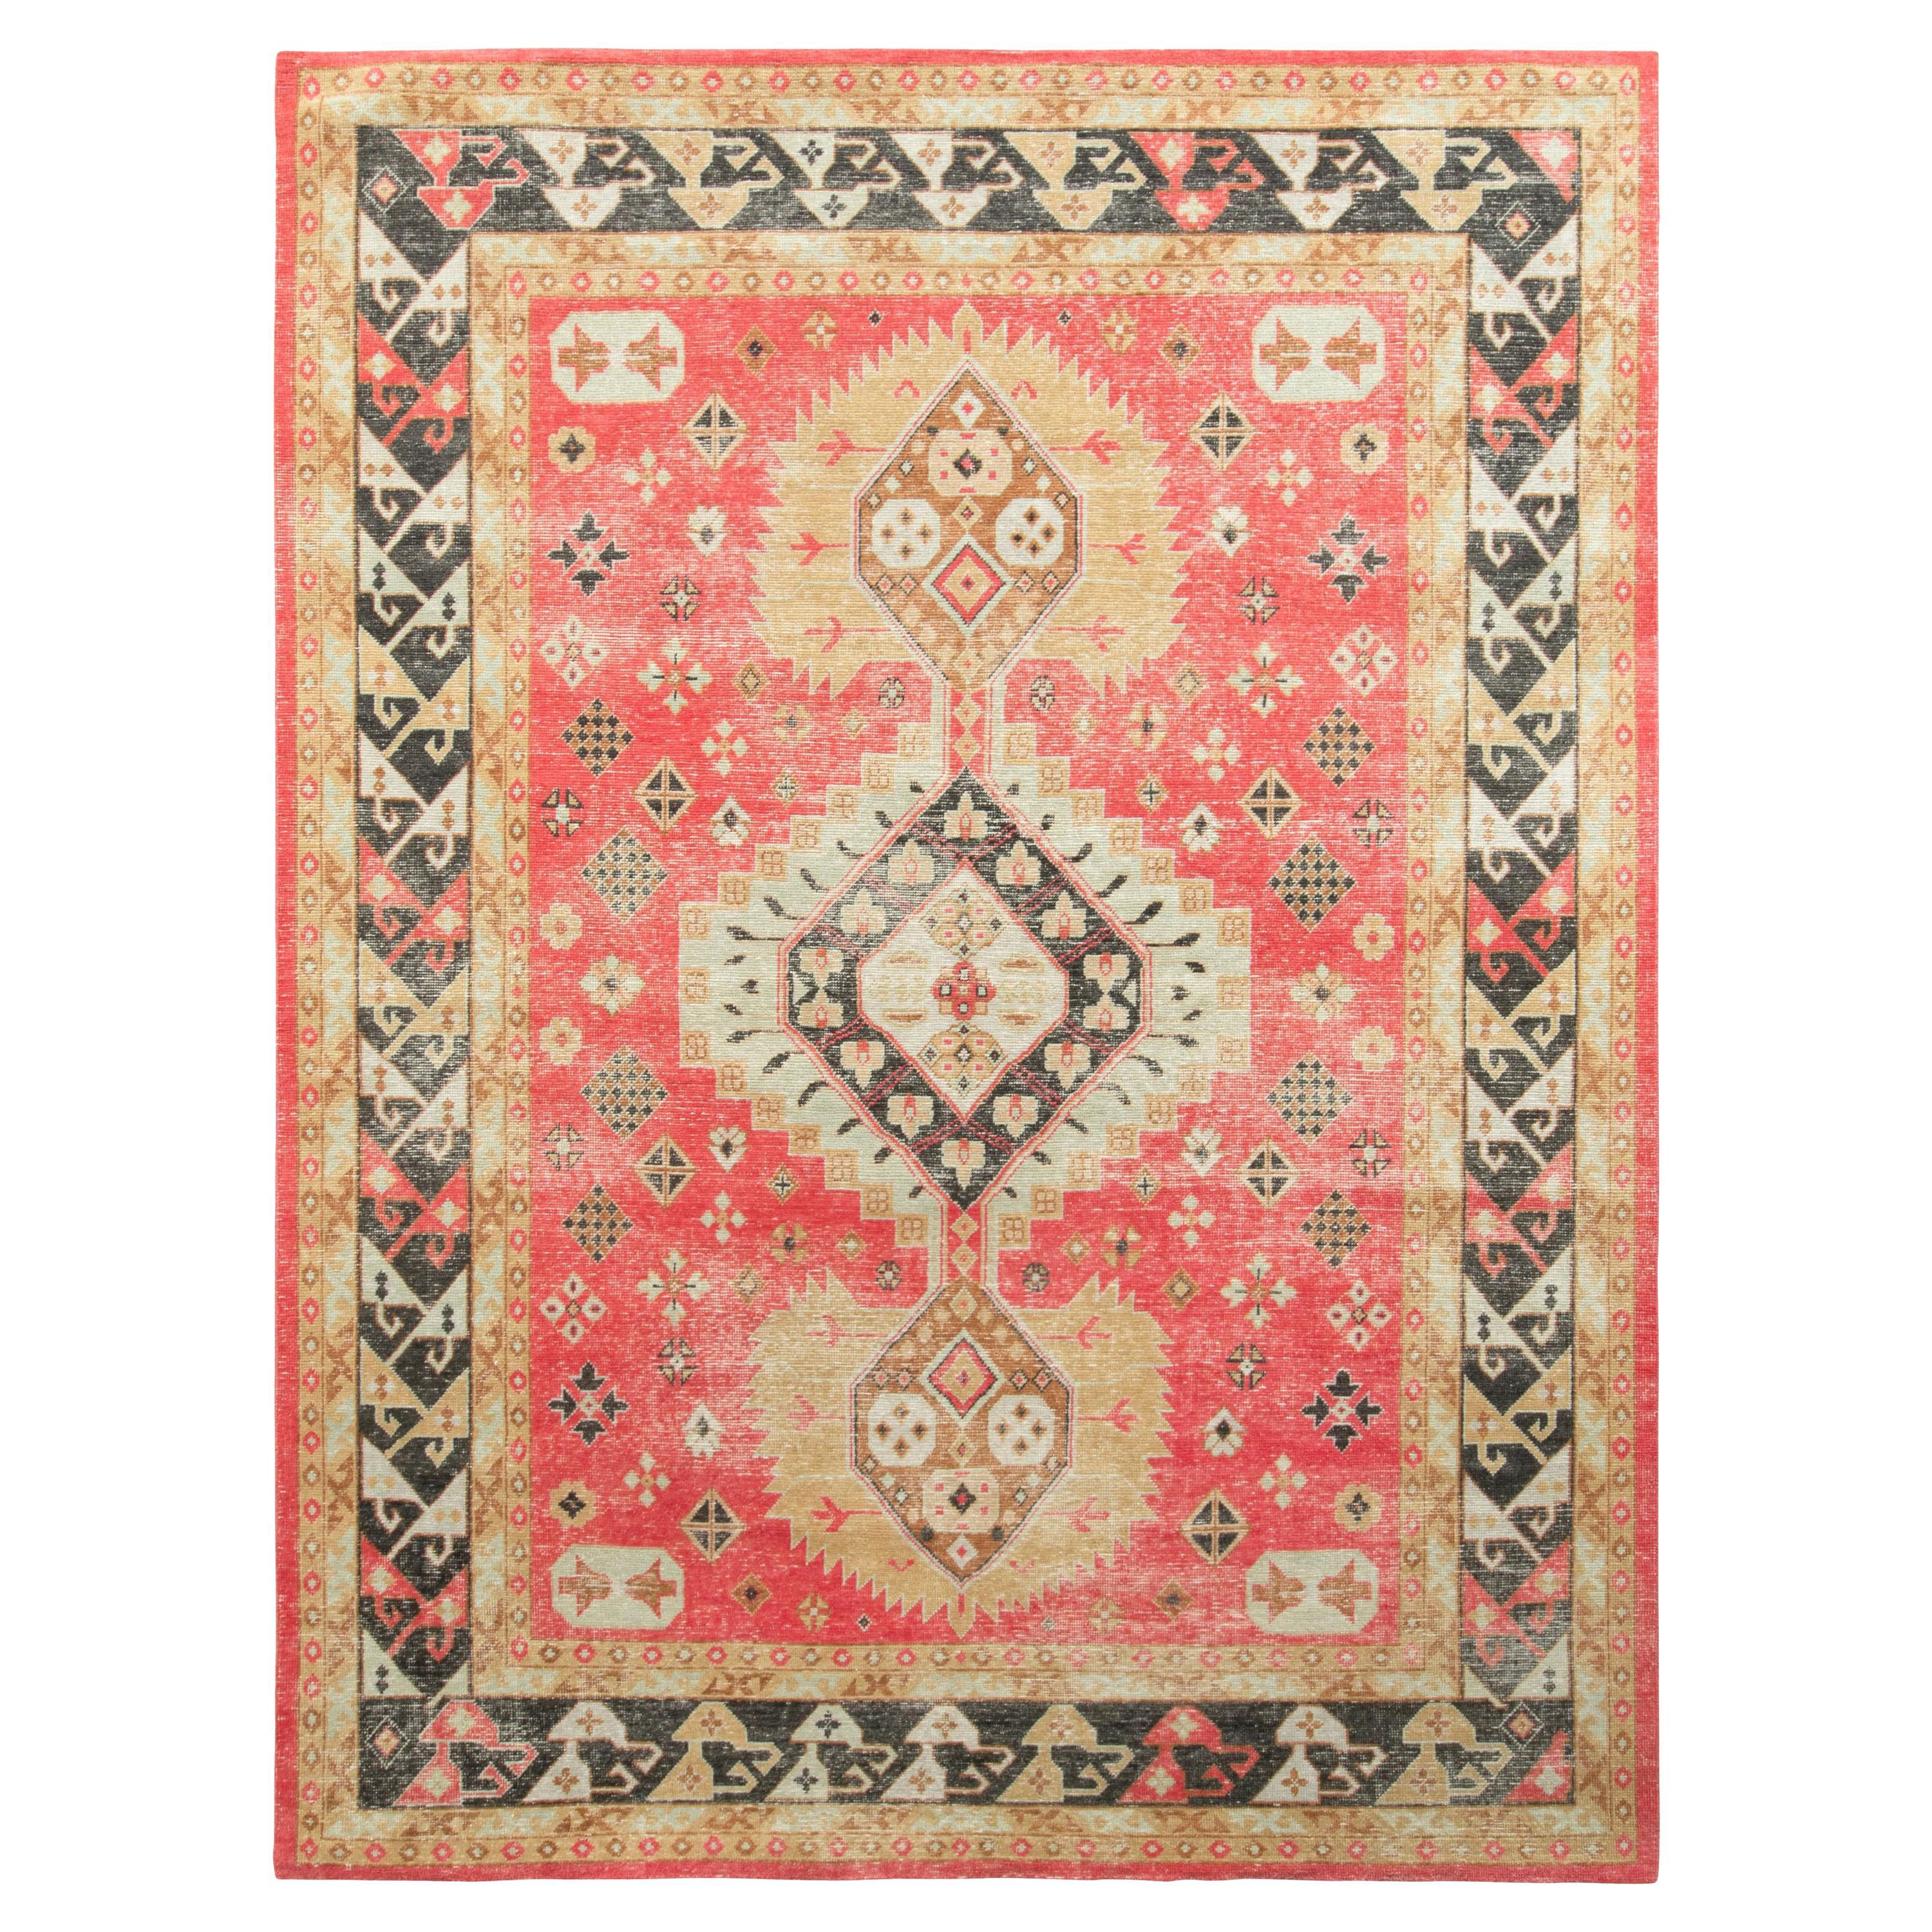 Rug & Kilim’s Distressed Style Rug in Red and Beige-Brown Geometric Pattern For Sale